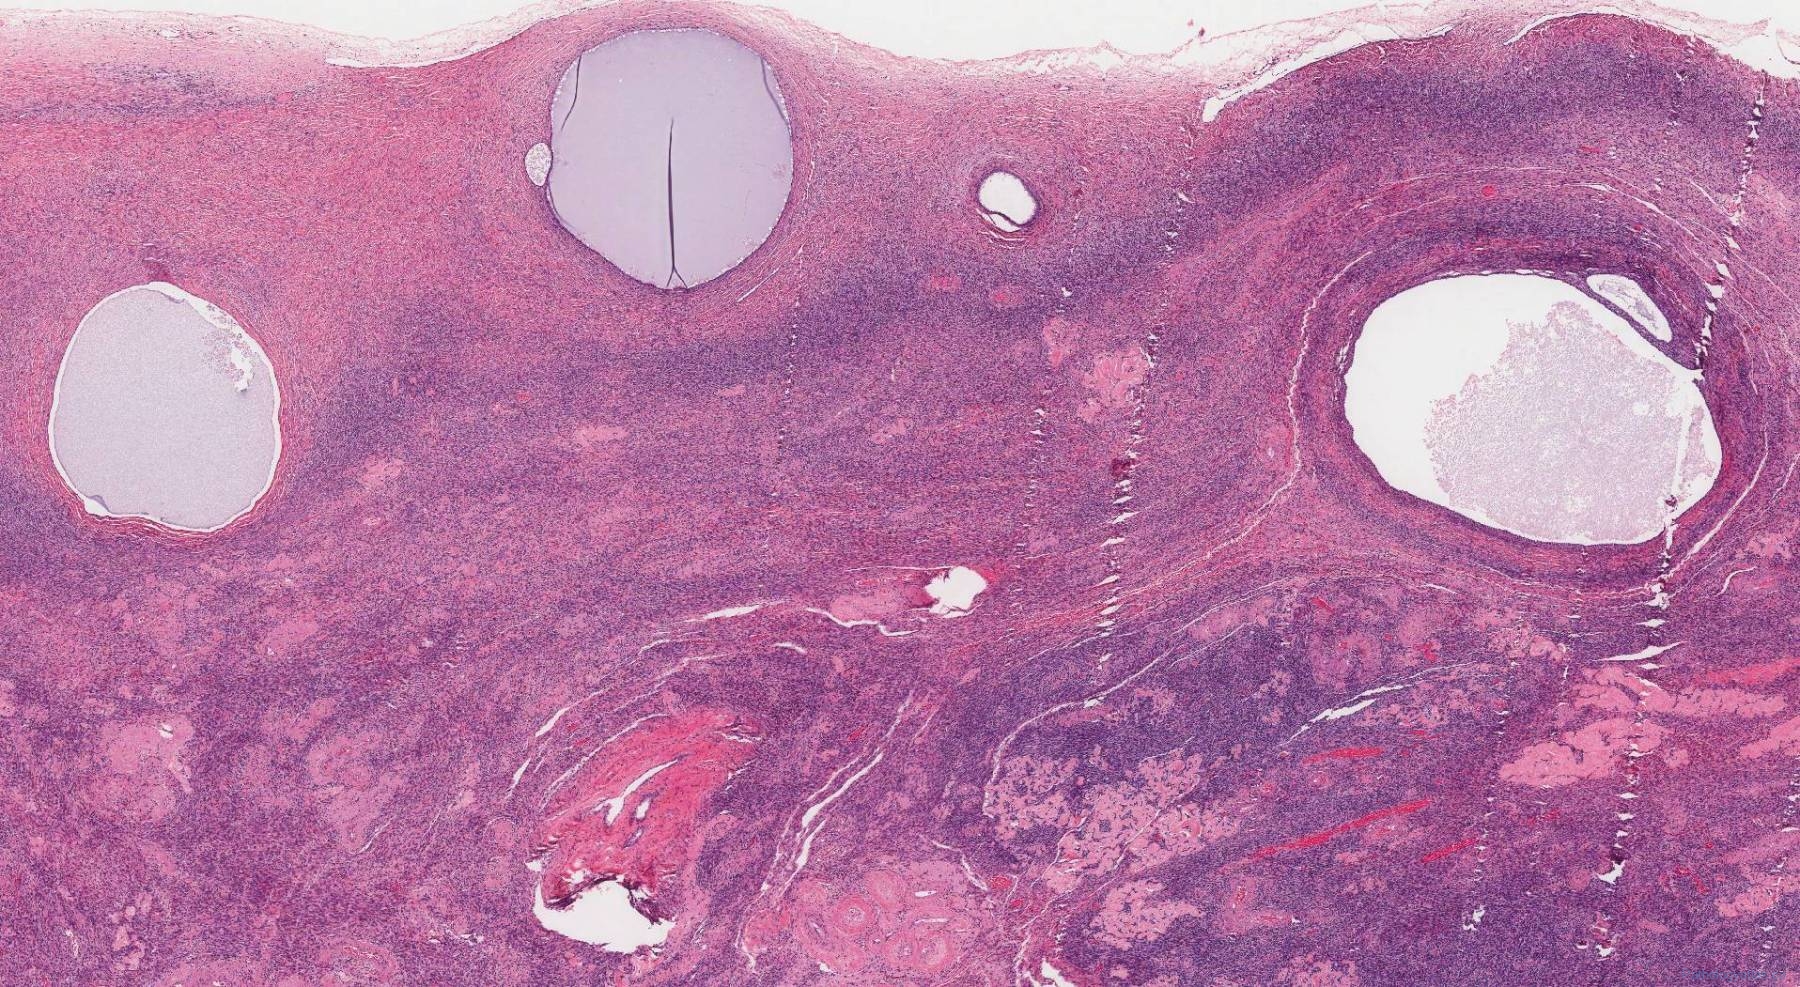 Cortical Inclusion Cysts Of The Ovary Atlas Of Pathology